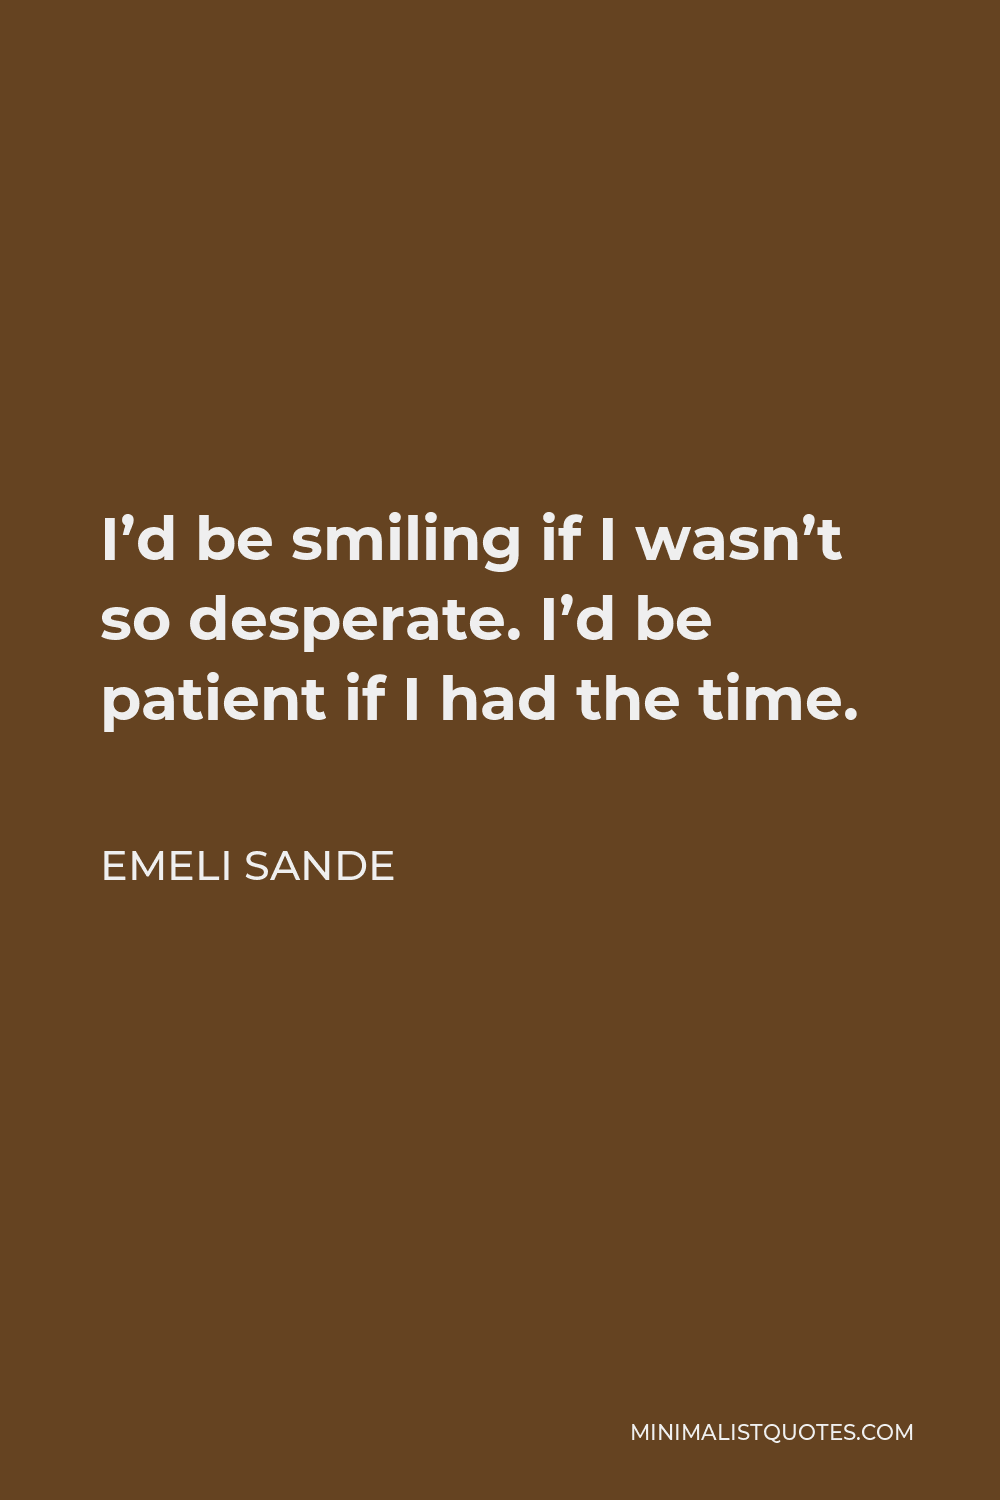 Emeli Sande Quote - I’d be smiling if I wasn’t so desperate. I’d be patient if I had the time.